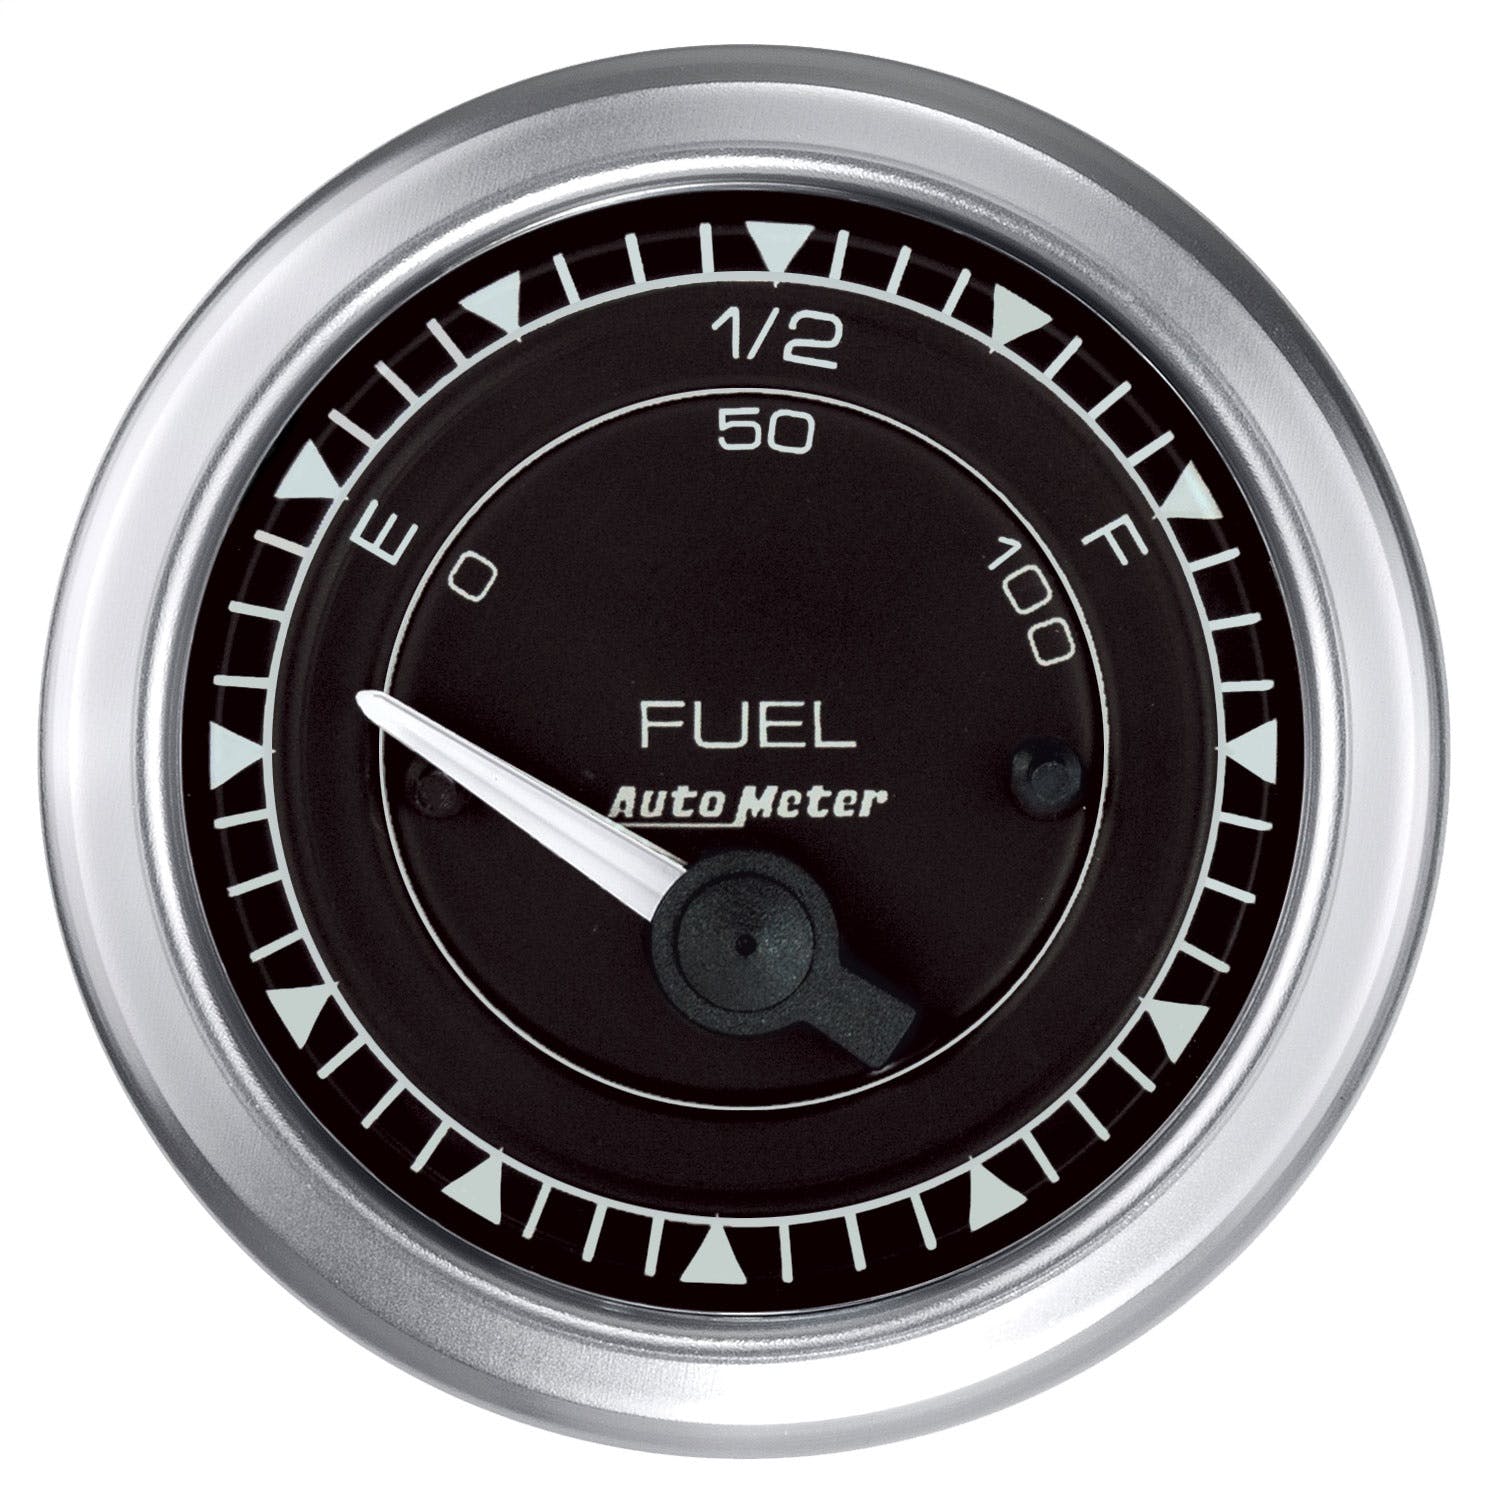 AutoMeter Products 8114 Fuel Level Gauge, 2 1/16, 0 ohm E TO 90 ohm F, Electric, Chrono